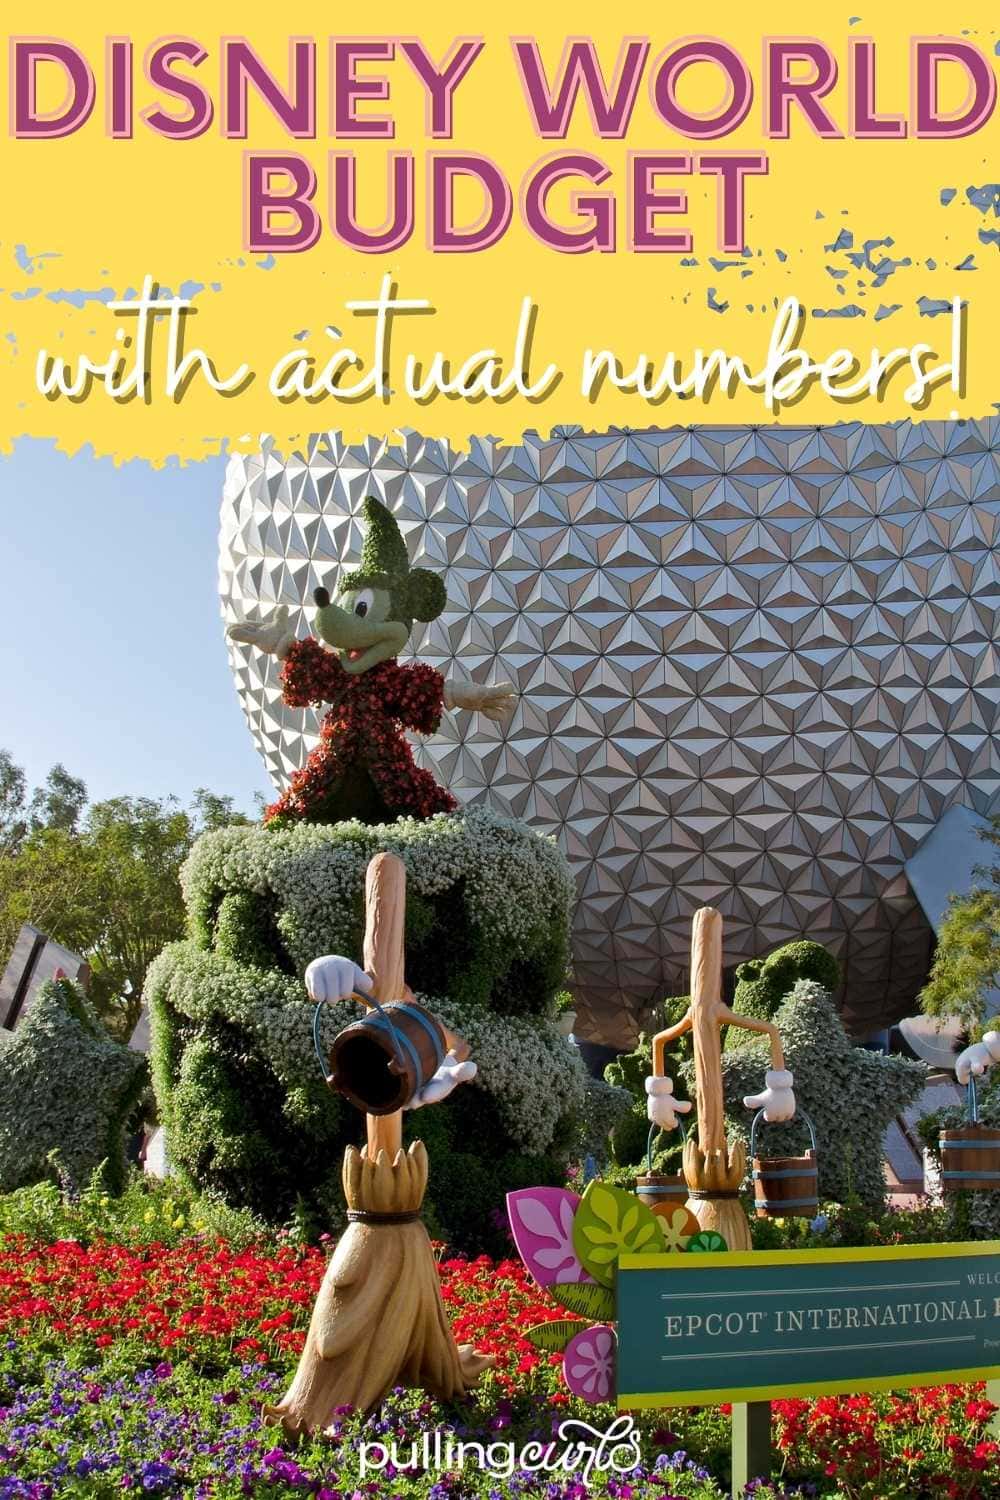 Disney world budget with actual numbers. Epcot center with Mickey Mouse. via @pullingcurls